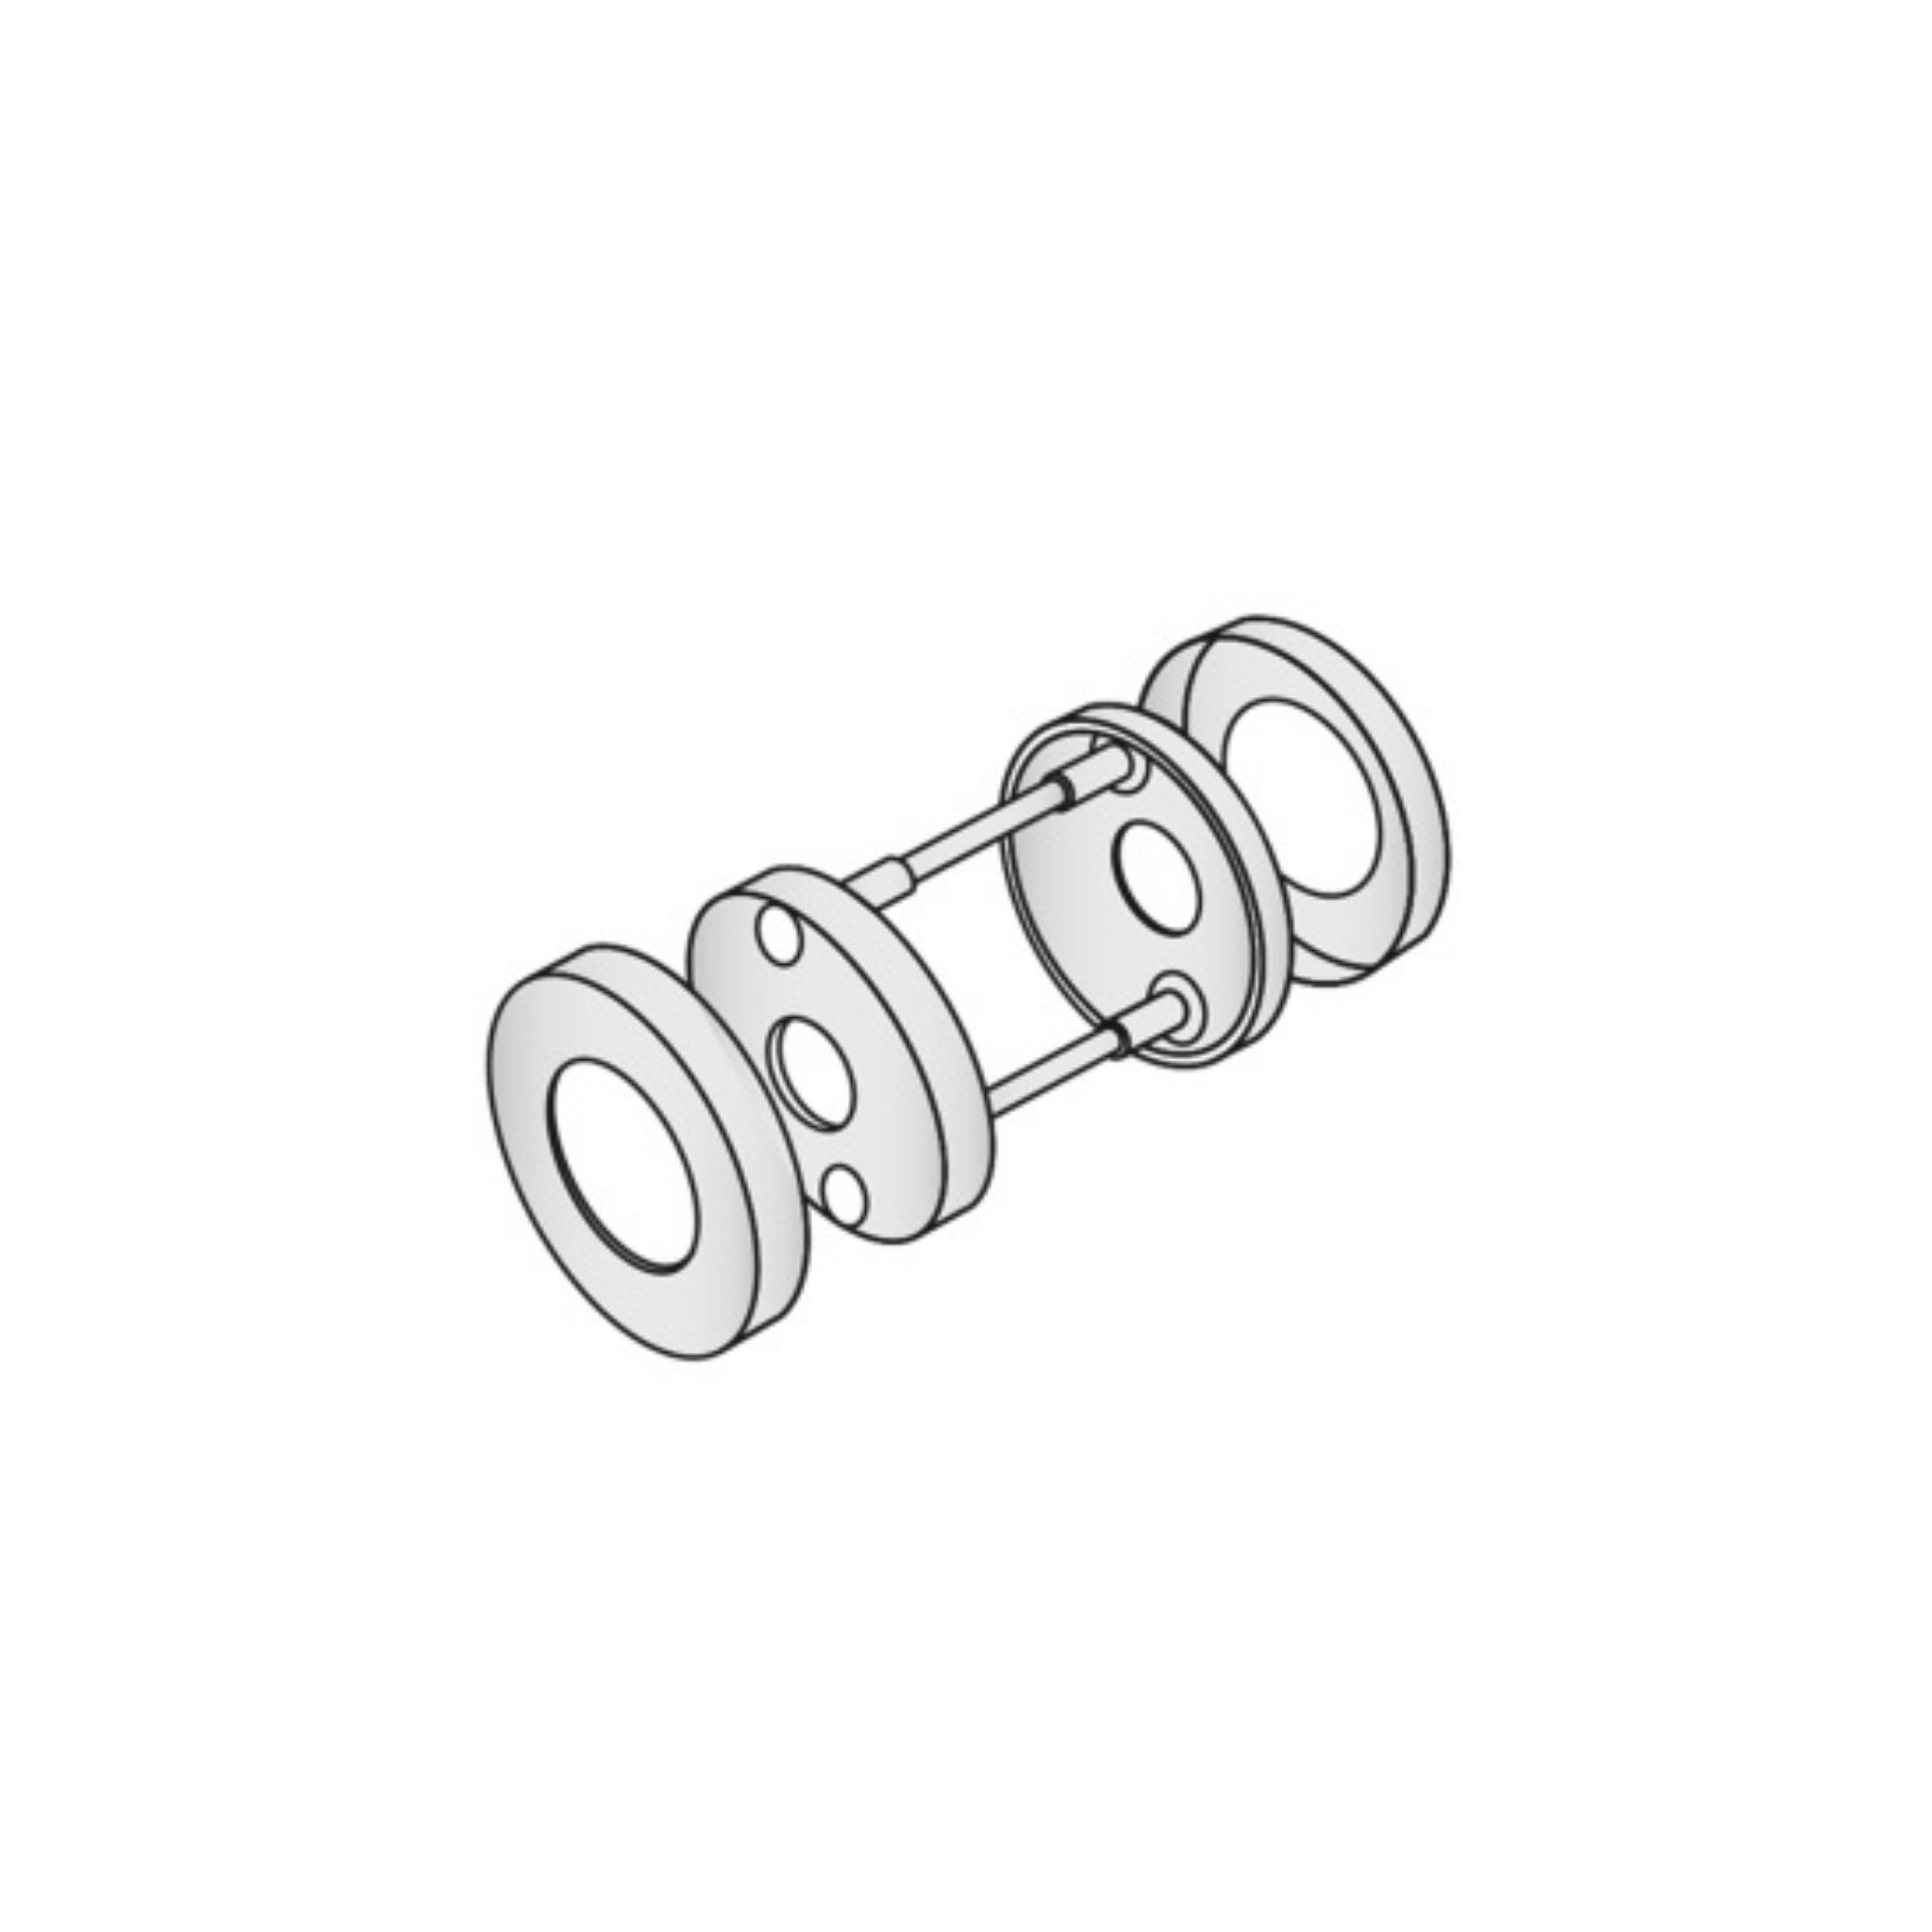 QS4499, Round Escutcheon with tamper-proof lugs, Stainless Steel, QS